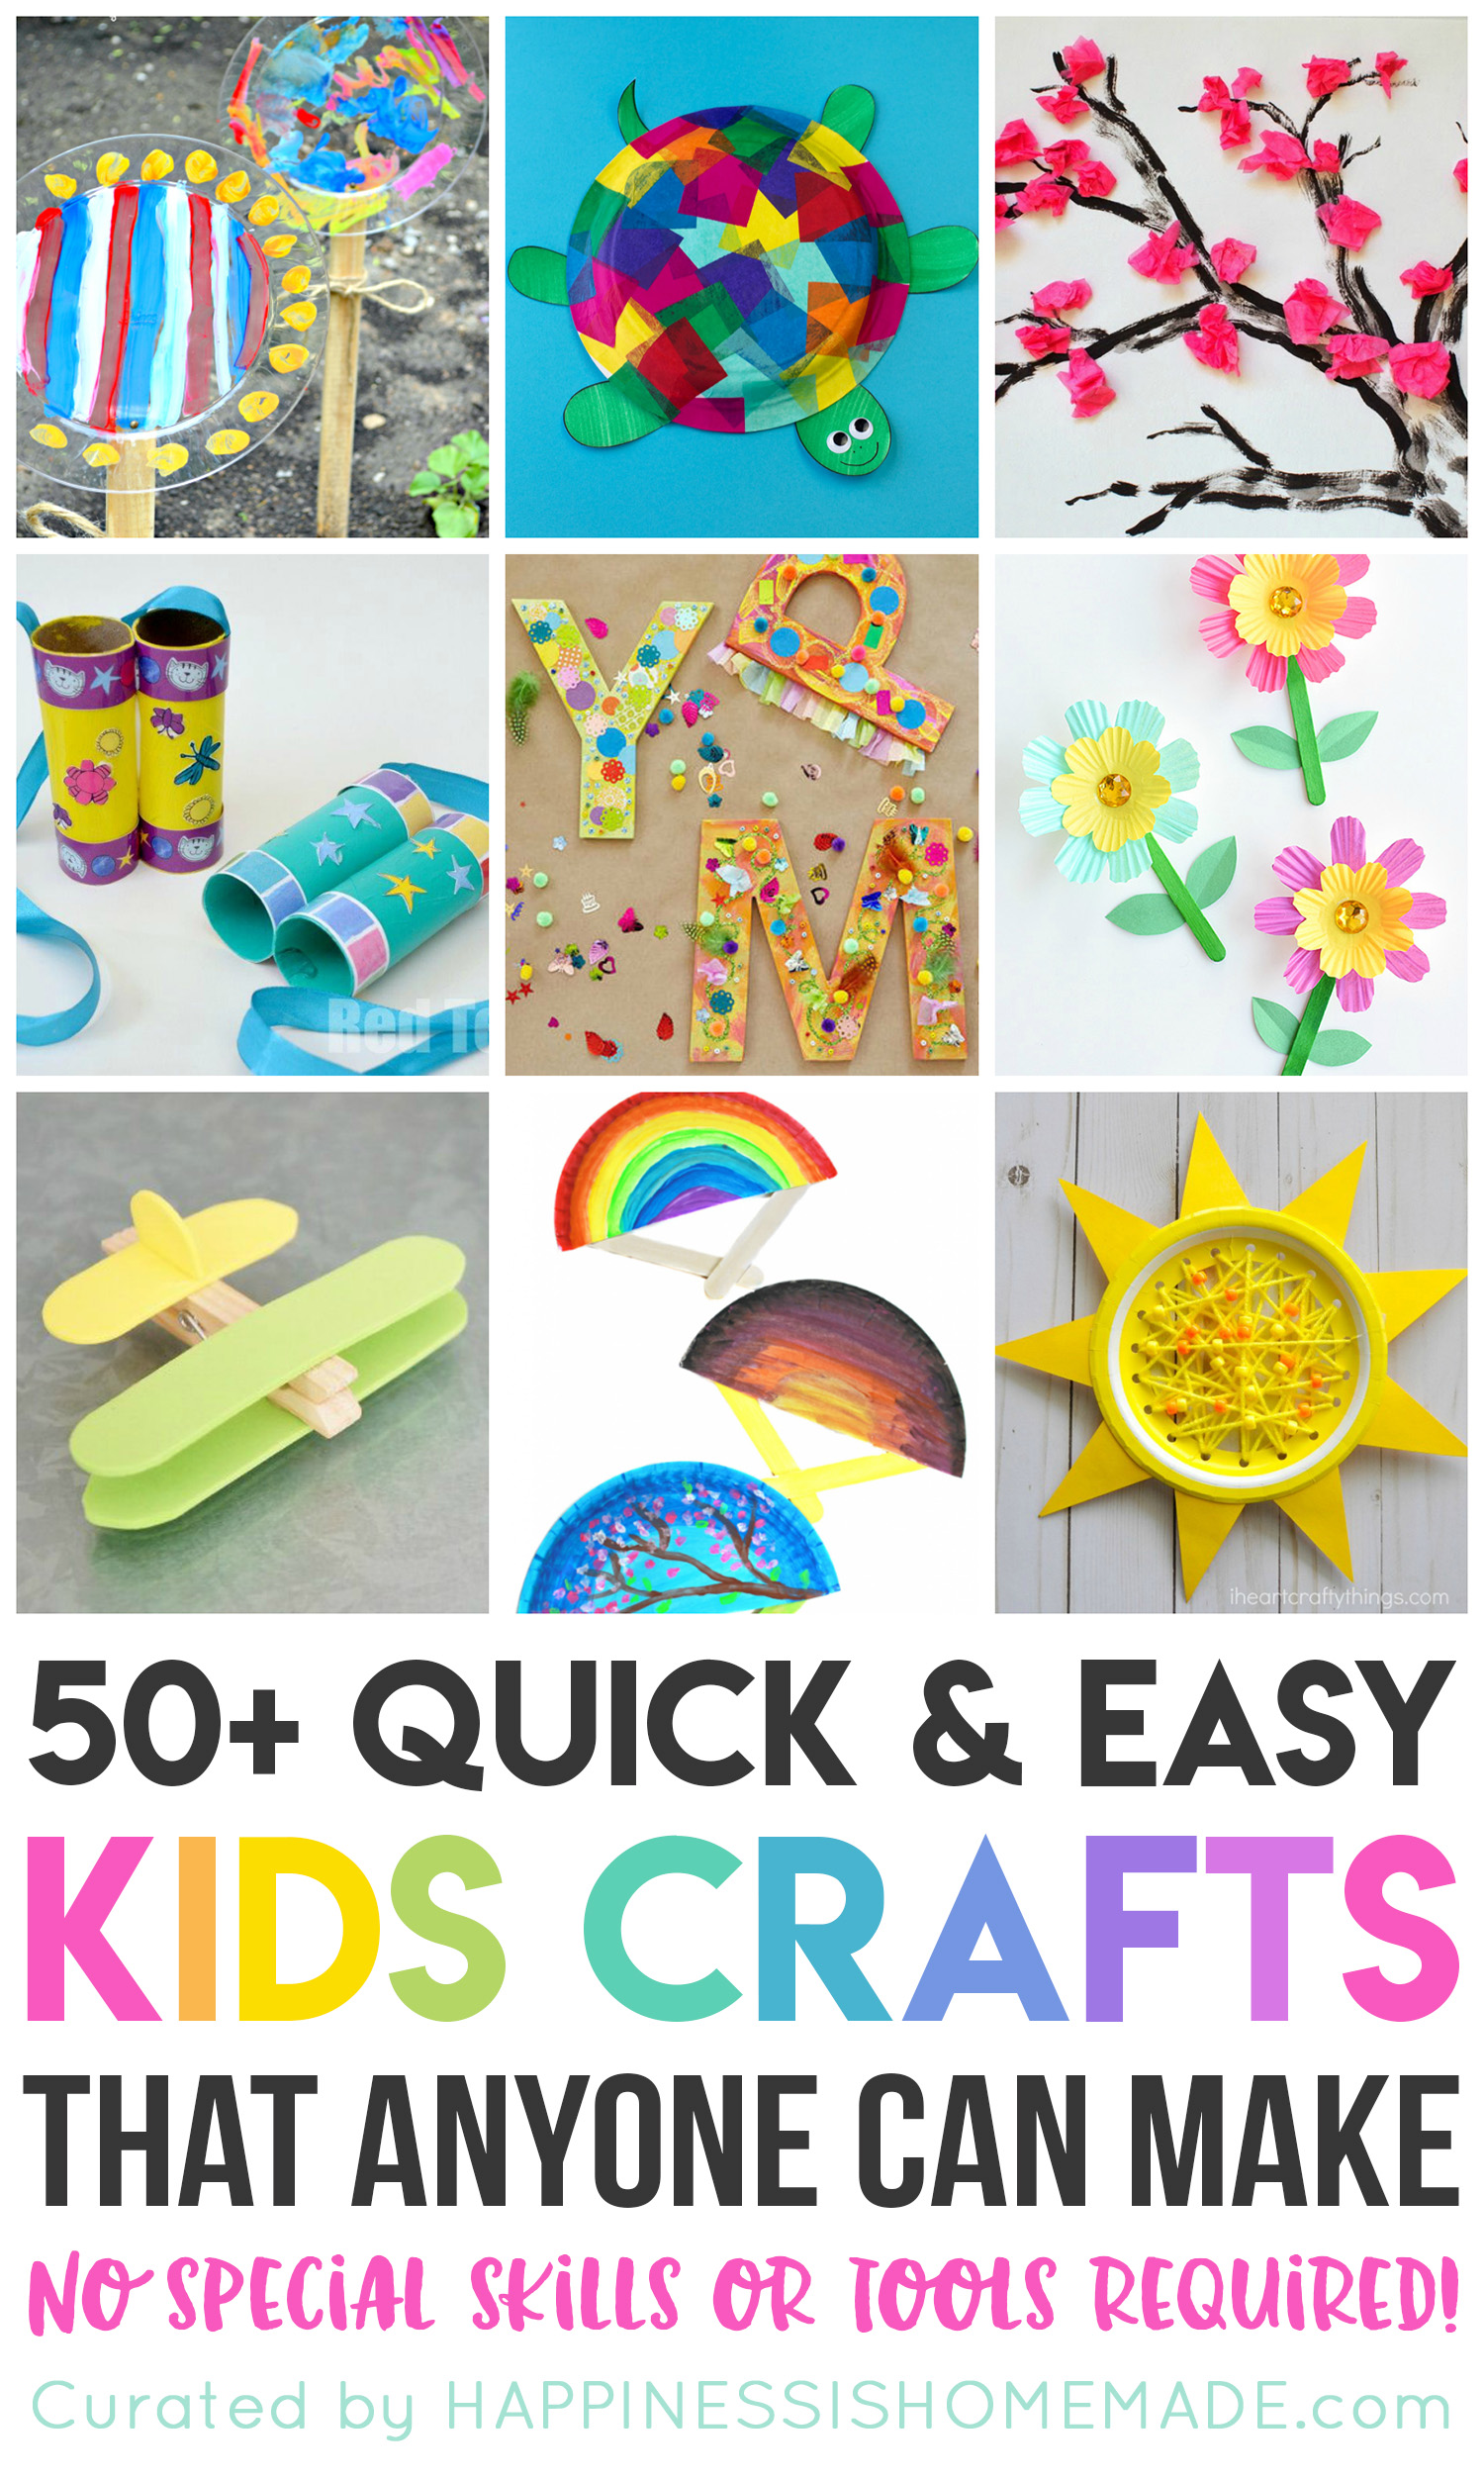 https://www.happinessishomemade.net/wp-content/uploads/2014/05/Easy-Kids-Crafts-that-Anyone-Can-Make.jpg